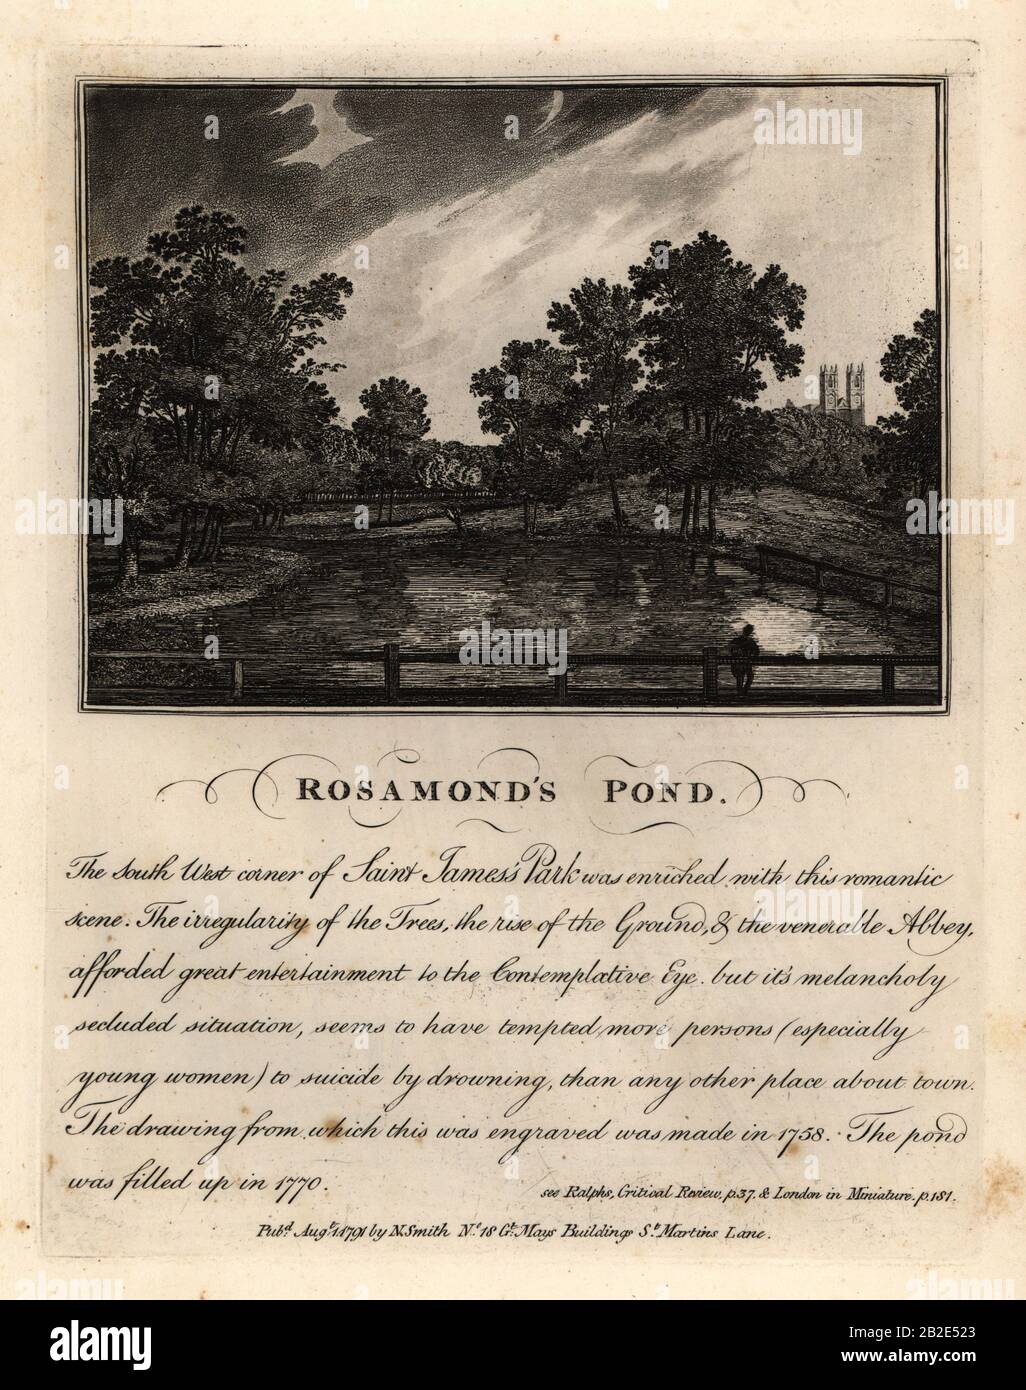 Rosamond’s Pond, St. James’ Park, circa 1758 (filled up in 1770). Copperplate engraving by John Thomas Smith after original drawings by members of the Society of Antiquaries from his J.T. Smith’s Antiquities of London and its Environs, J. Sewell, R. Folder, J. Simco, London, 1791. Stock Photo